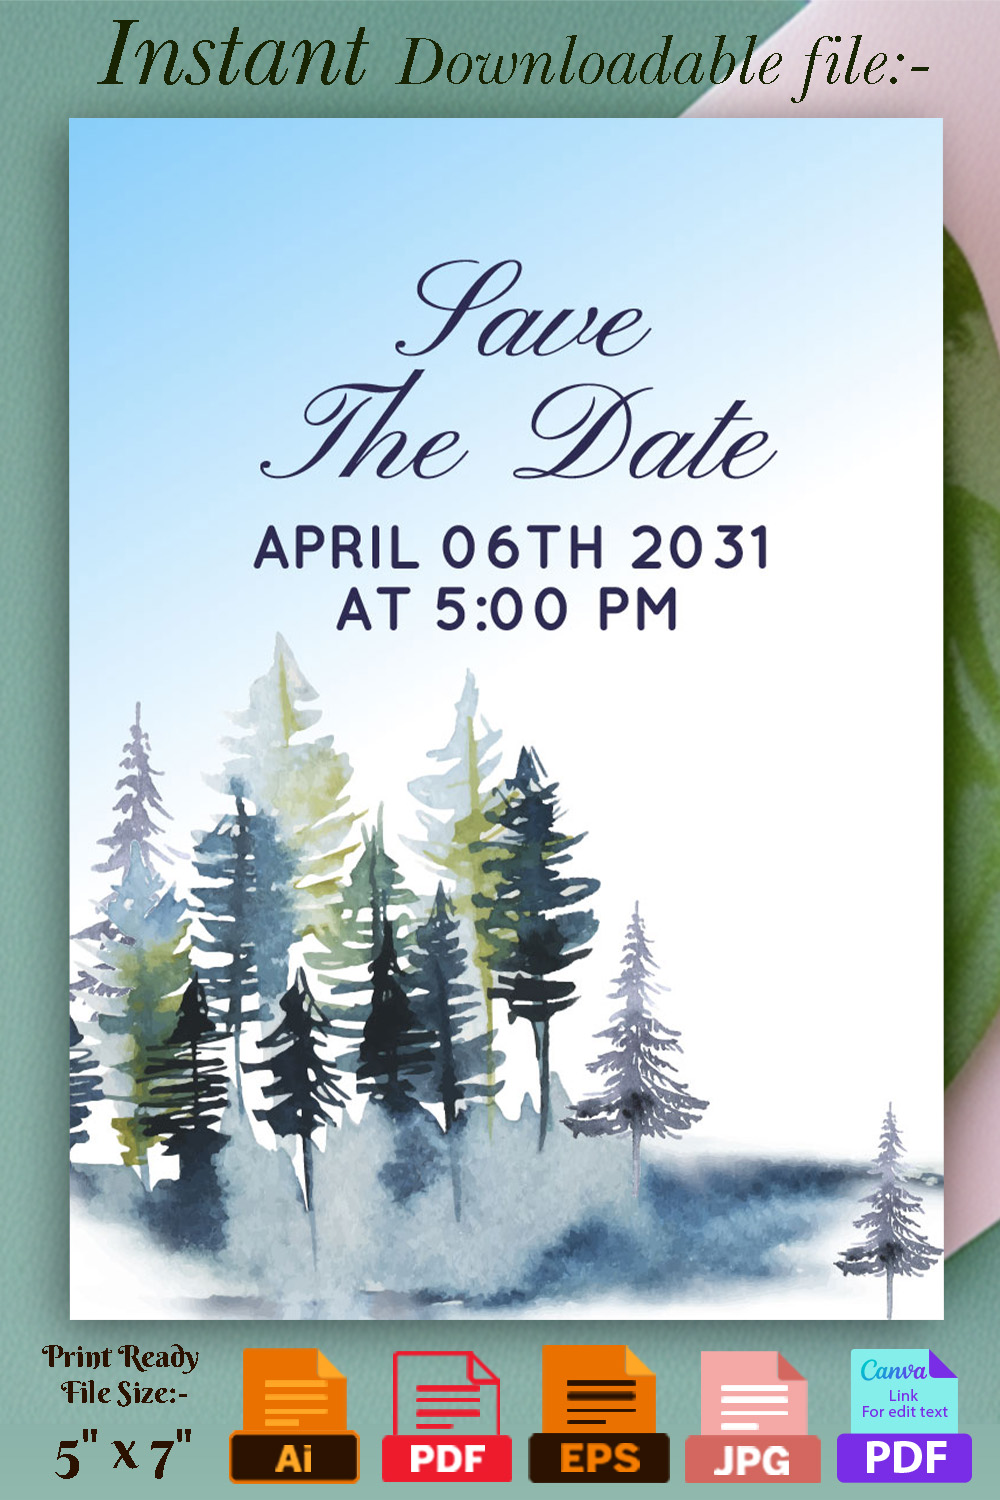 Pine Tree Forest and Winter Wedding Card Pinterest.